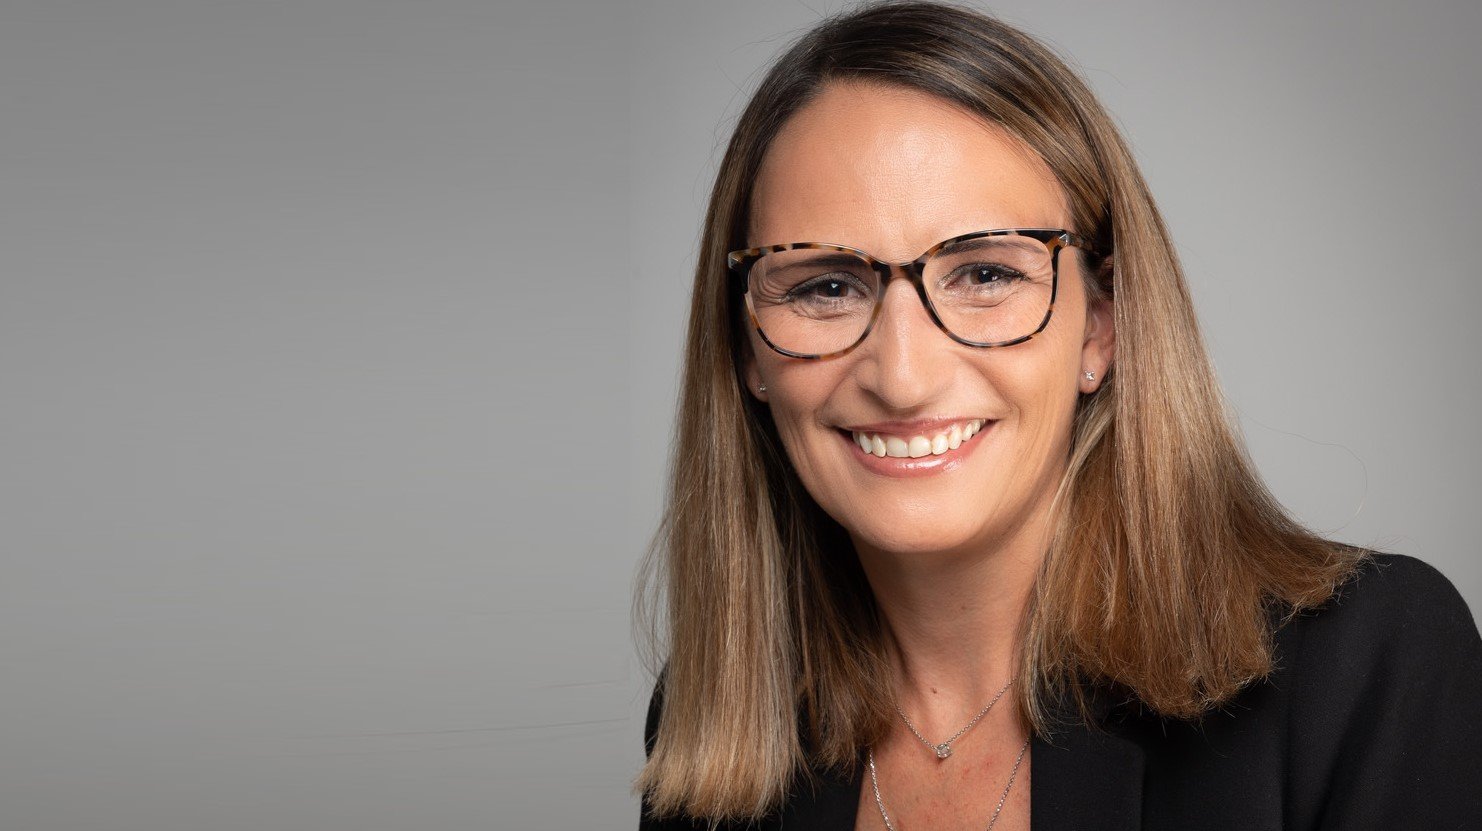 Aristocrat Gaming appoints Marie Hubaud as Senior Market Manager for France